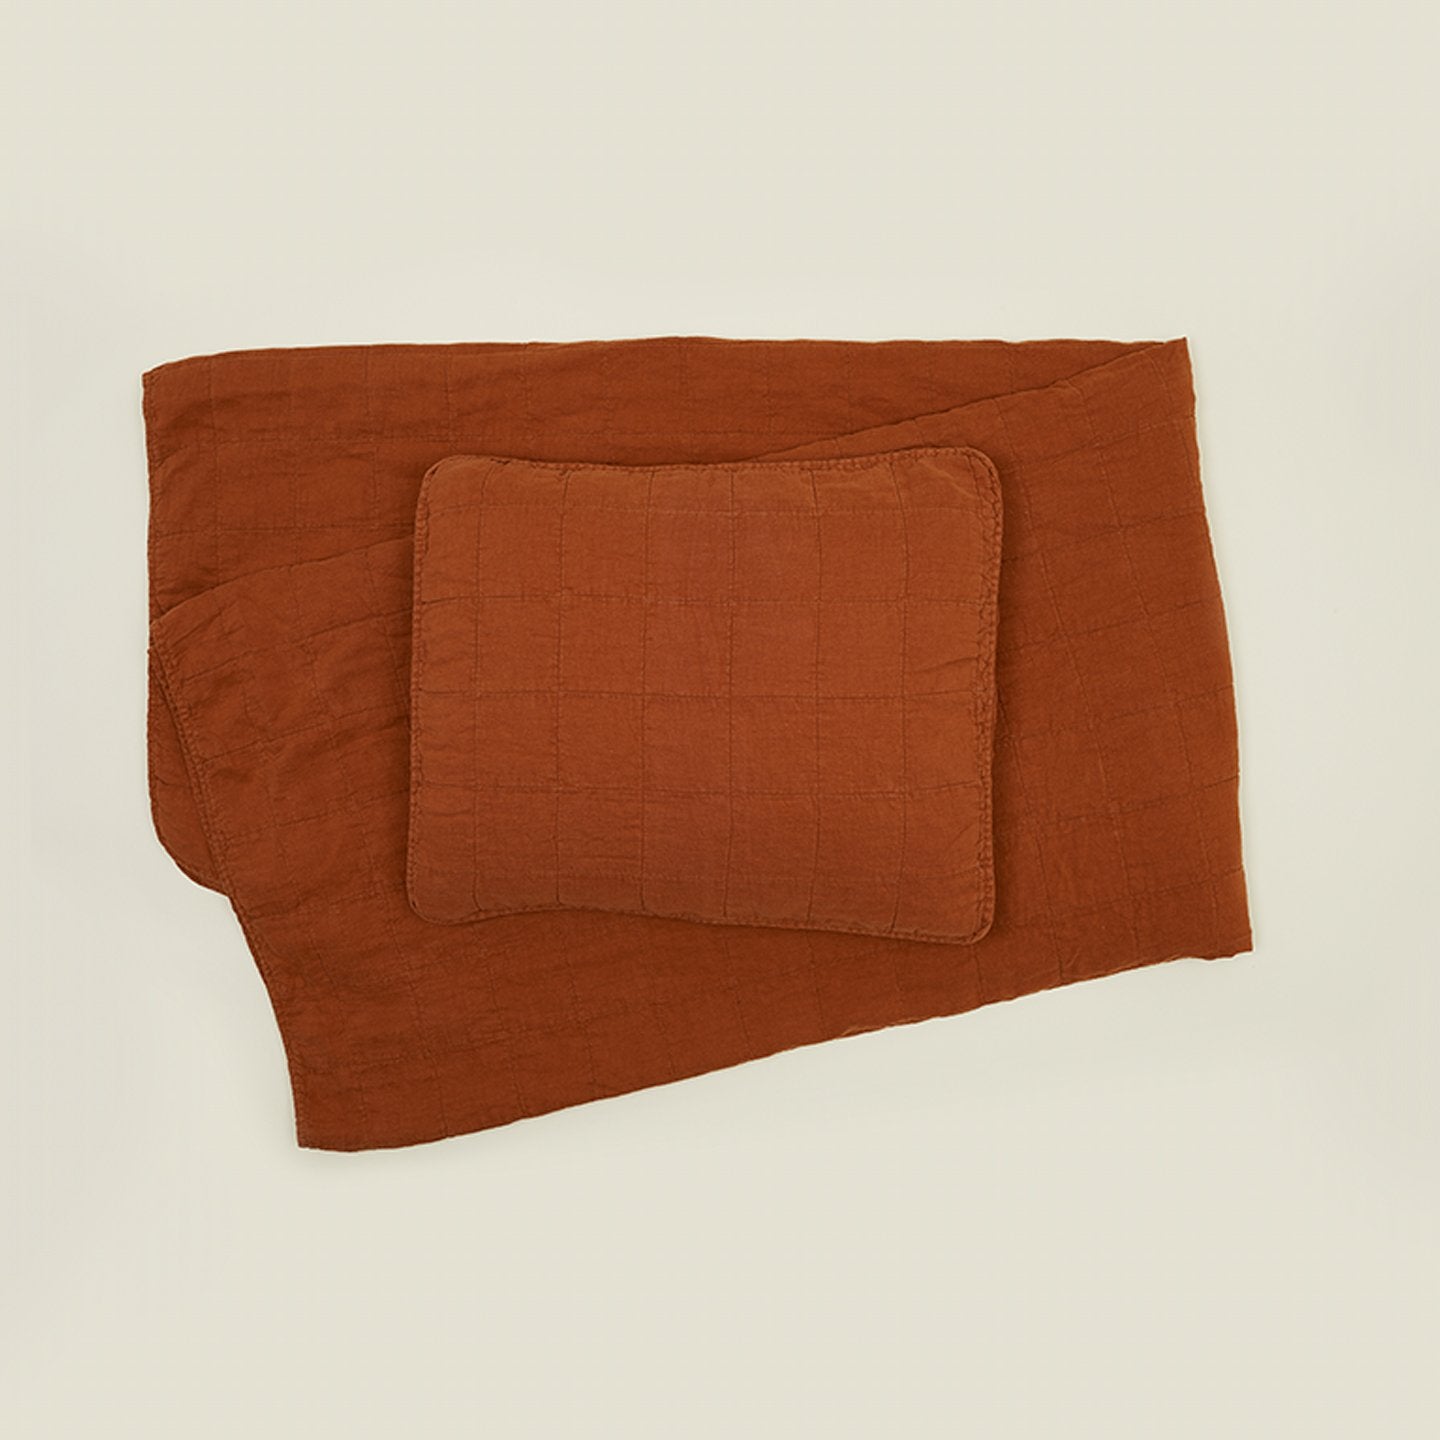 Simple Linen Quilted Shams - Terracotta